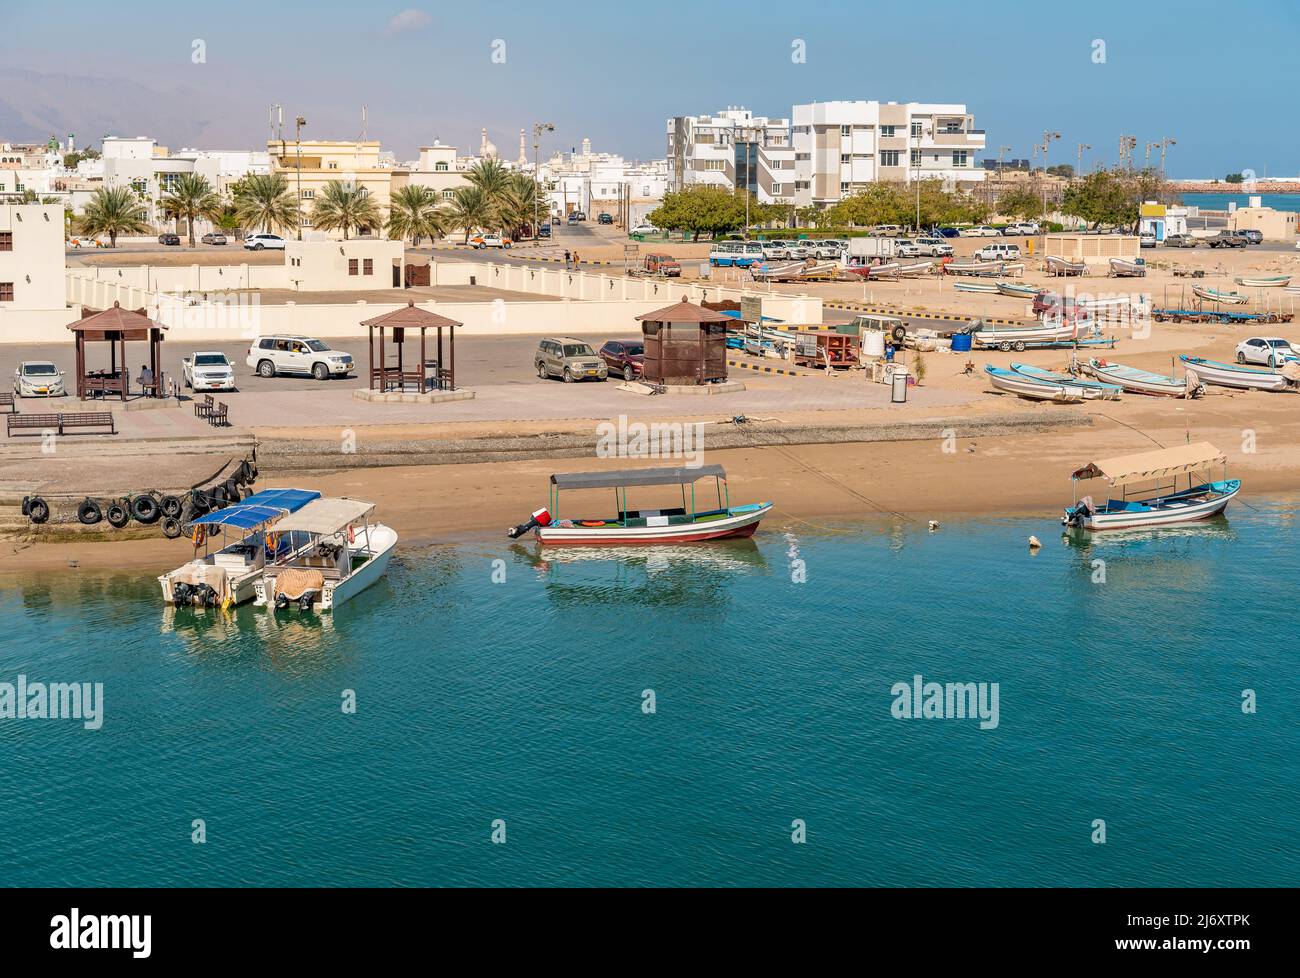 Bay of the Sur city with traditional boats, Sultanate of Oman in the Middle East. Stock Photo